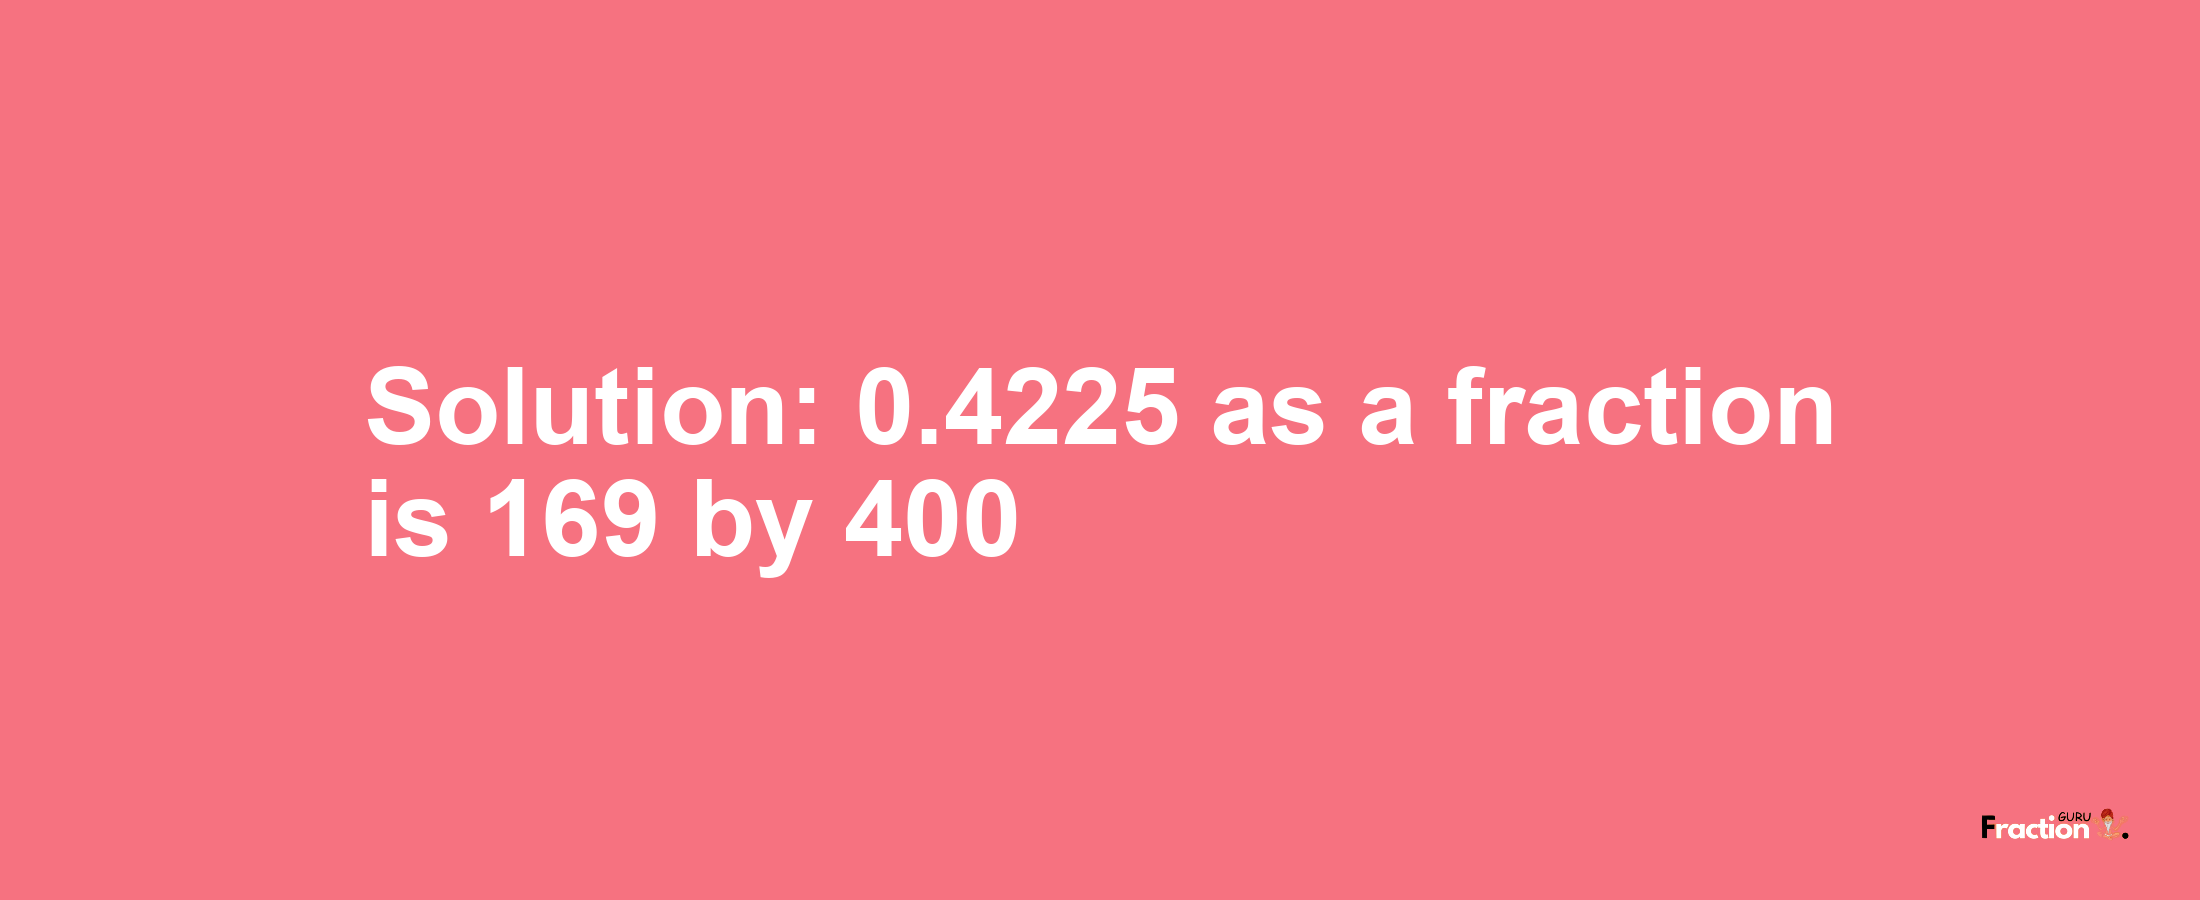 Solution:0.4225 as a fraction is 169/400